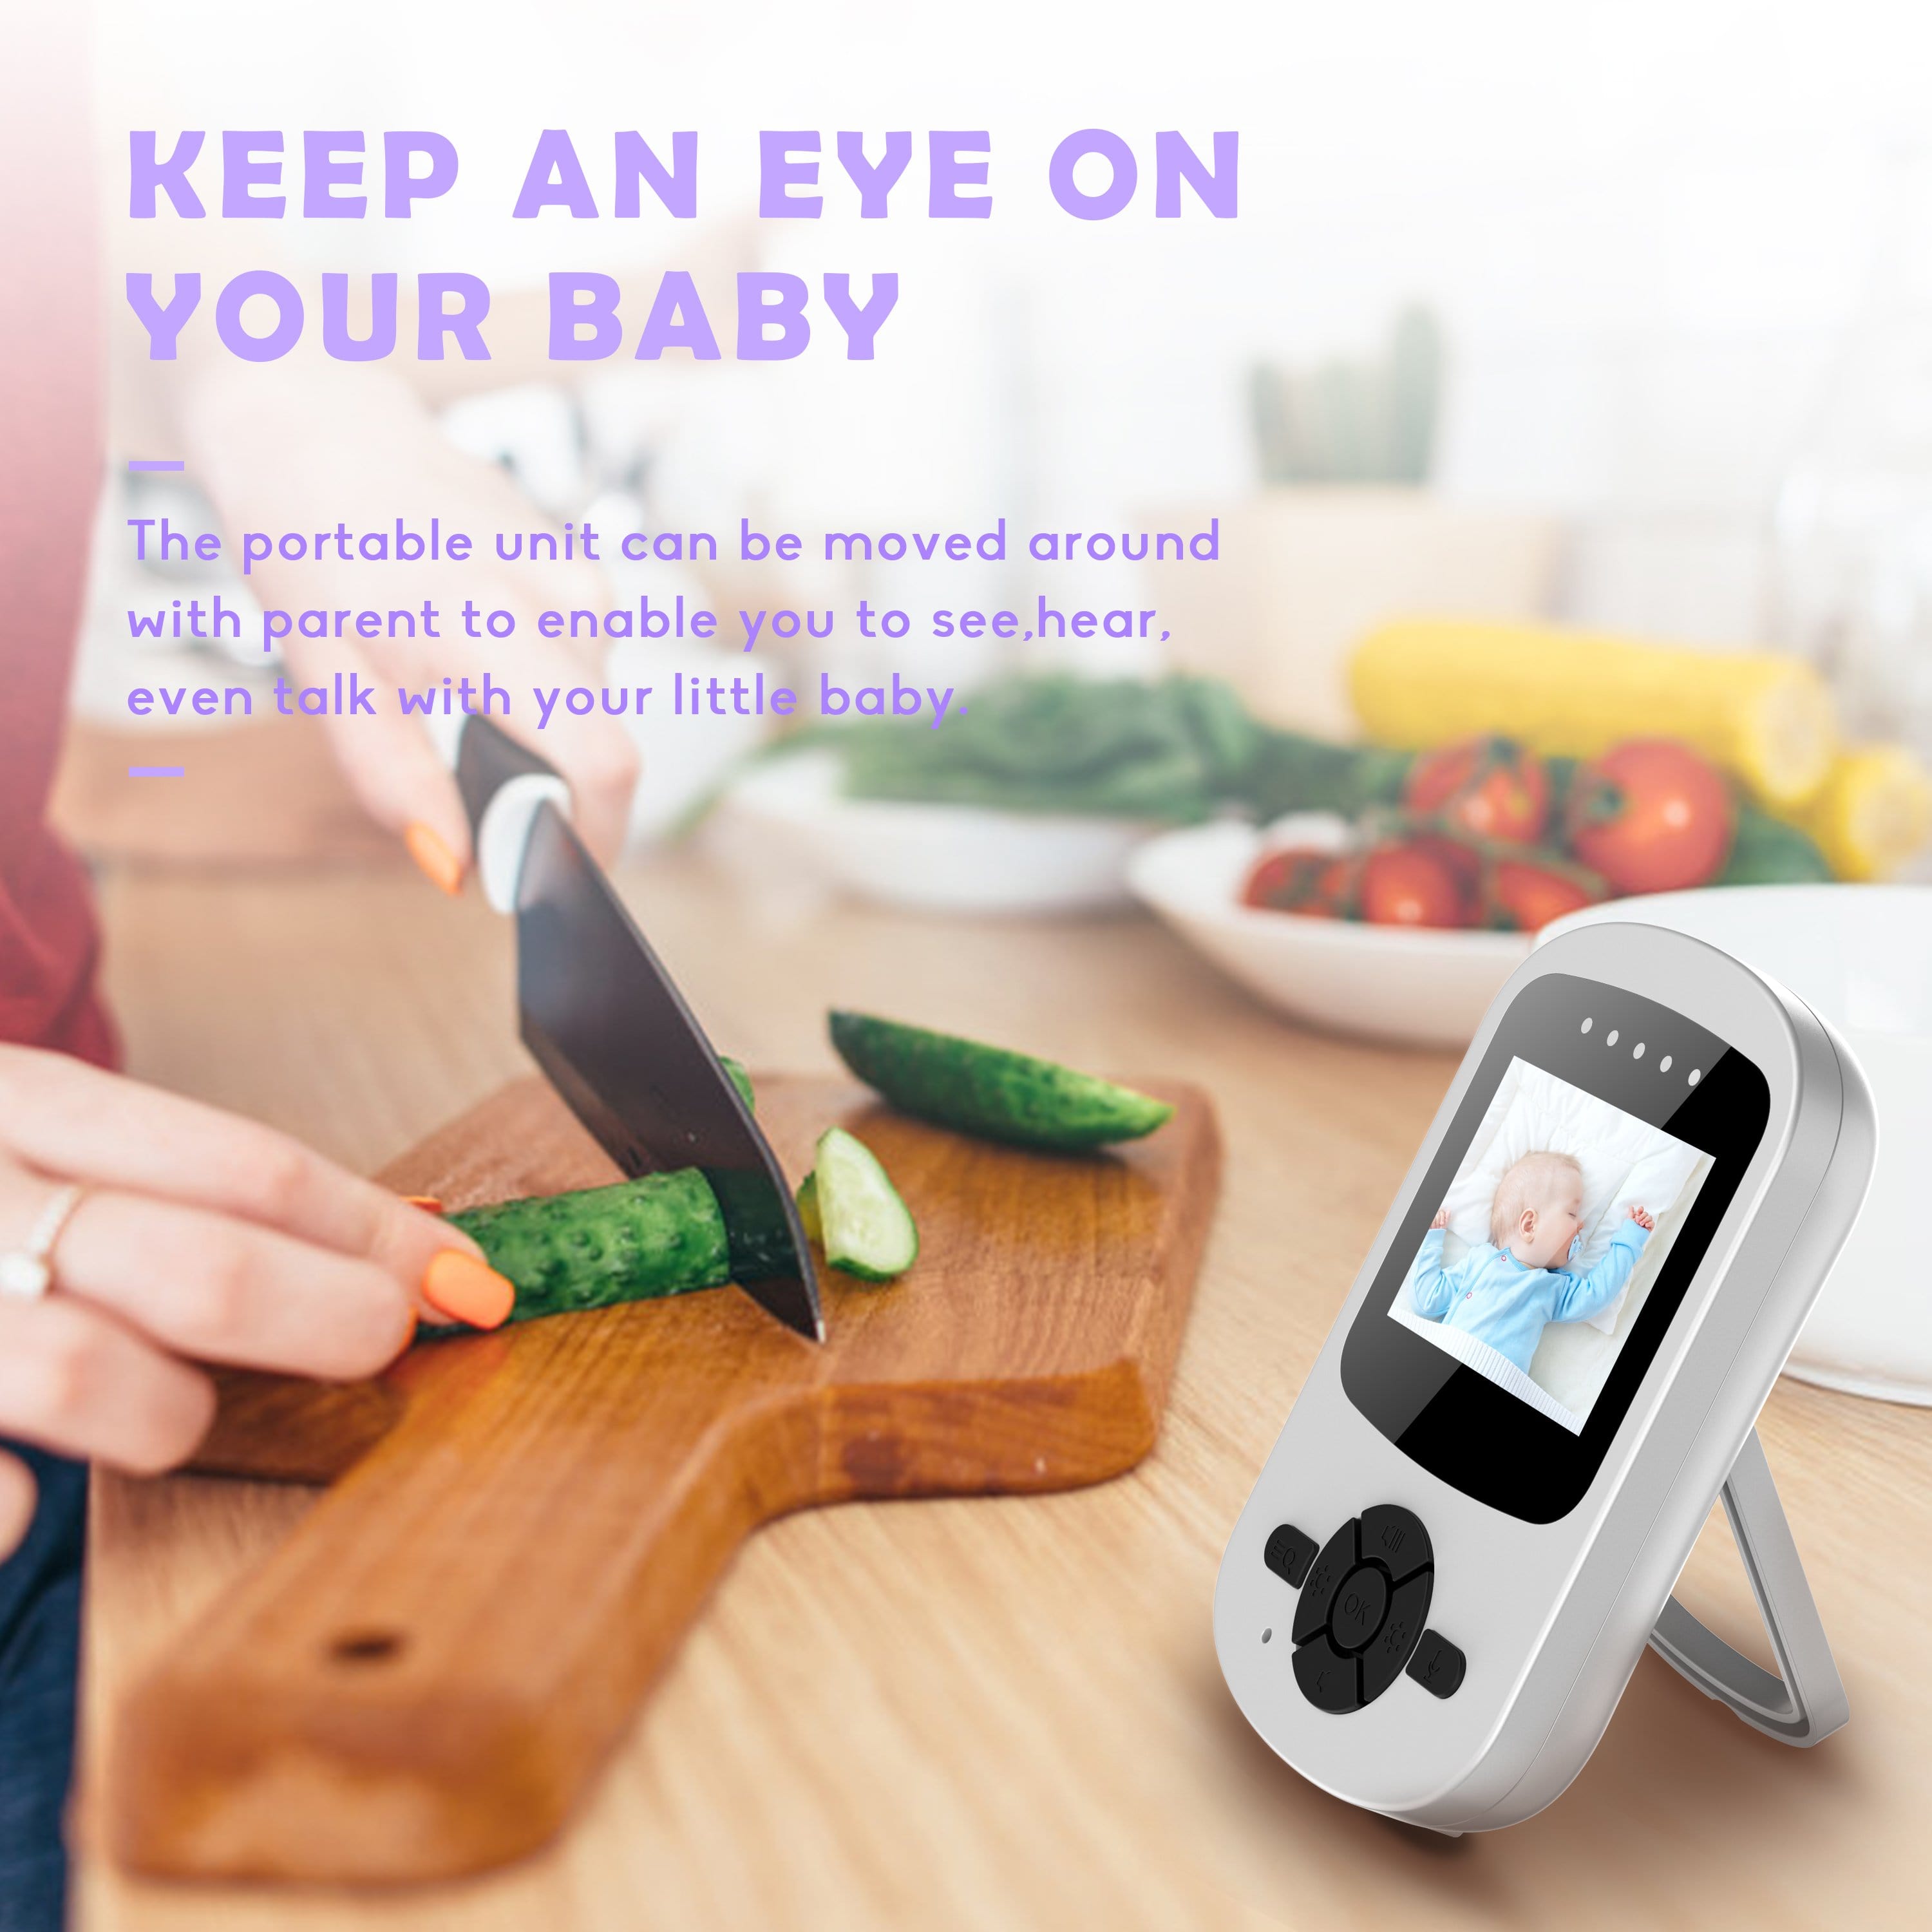 Campark Video Baby Monitor with Camera Infant Optics Digital Cam